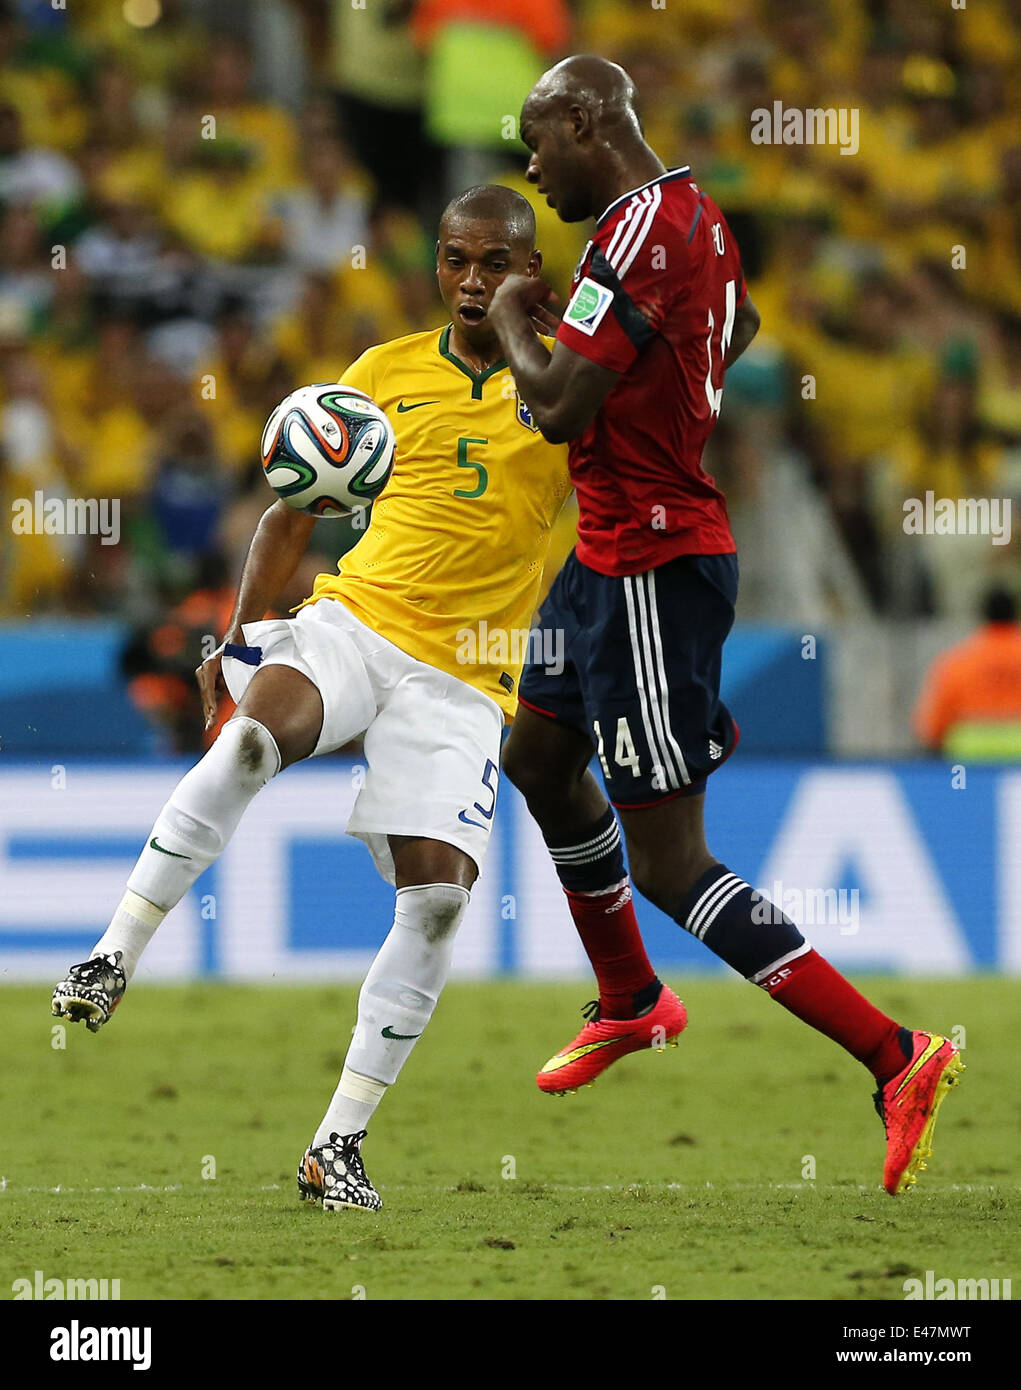 Fortaleza, Brazil. 4th July, 2014. Brazil's Fernandinho vies with Colombia's Victor Ibarbo during a quarter-finals match between Brazil and Colombia of 2014 FIFA World Cup at the Estadio Castelao Stadium in Fortaleza, Brazil, on July 4, 2014. Credit:  Zhou Lei/Xinhua/Alamy Live News Stock Photo